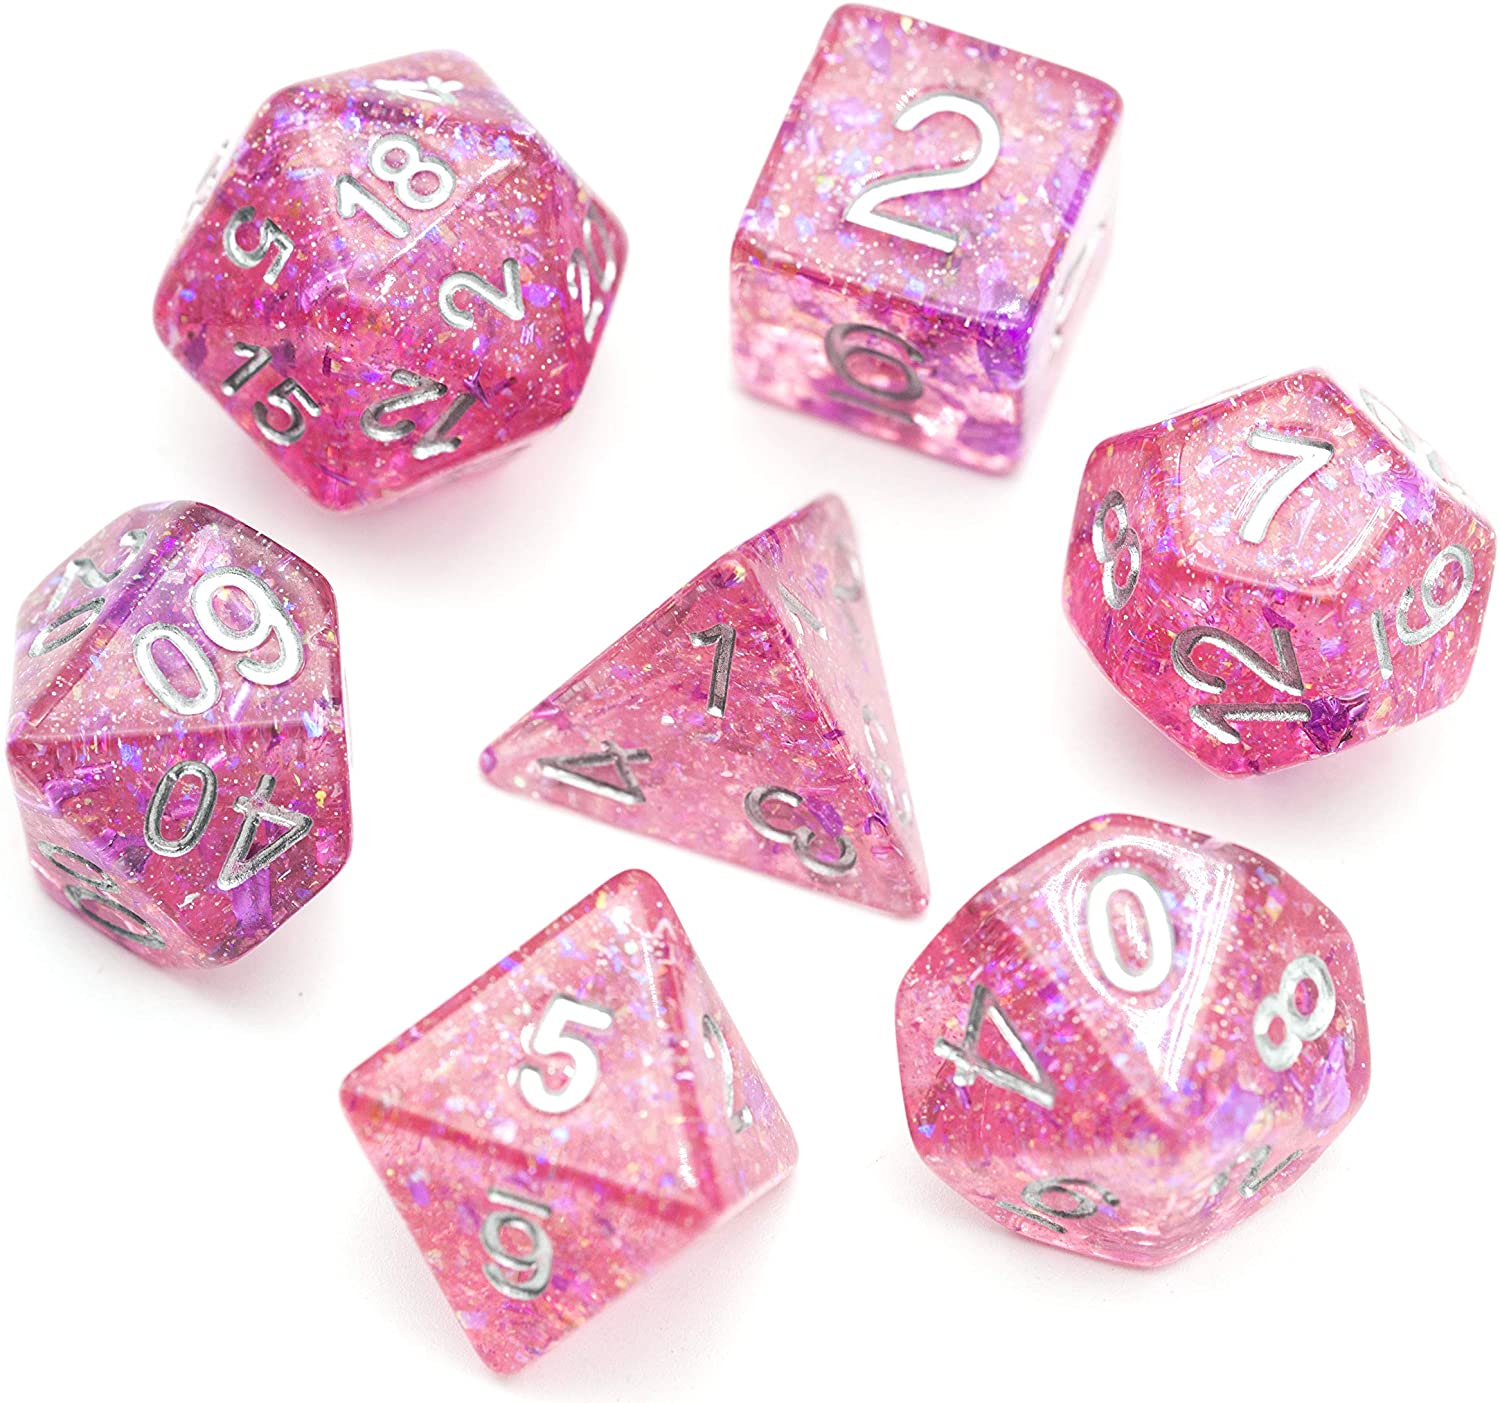 Pathfinder MTG,7-Die Set Role Playing Games Dice with Glitter Pink Blue Yellow Polyhedral DND Dice Set Rainbow Dice Series for Dungeons and Dragons RPG D&D 